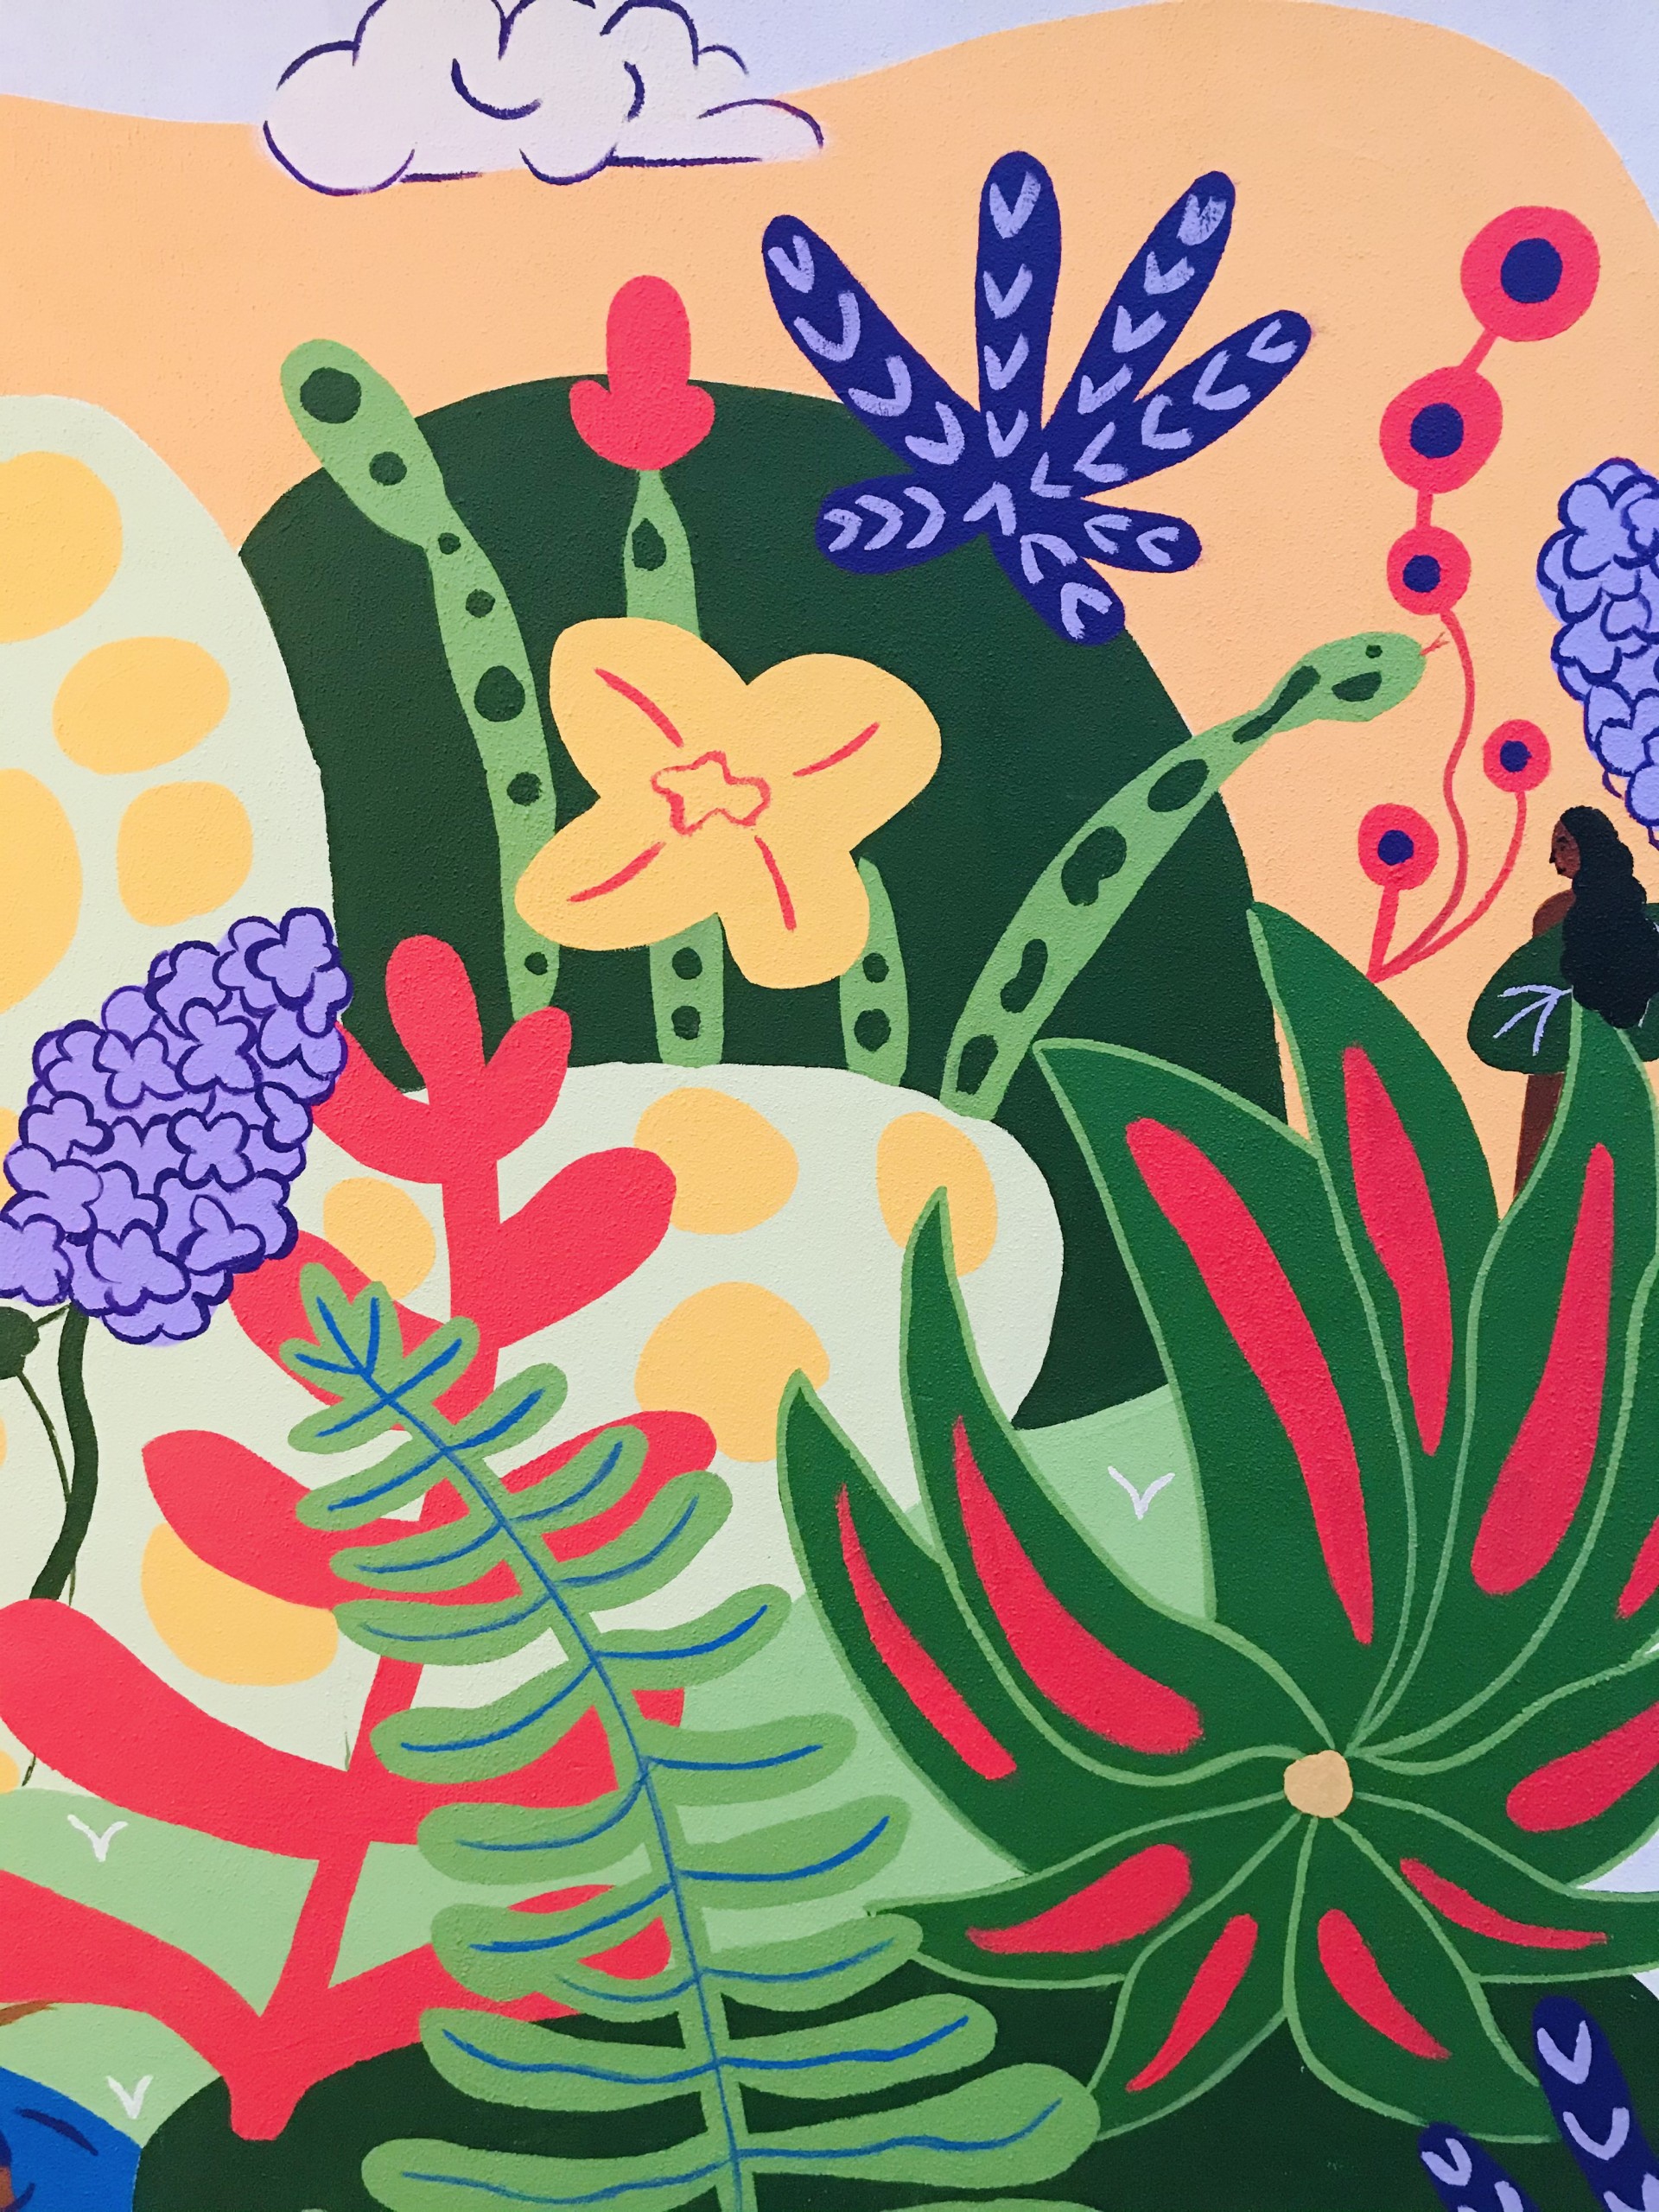 Detail of brightly painted plants, animals and female figure.